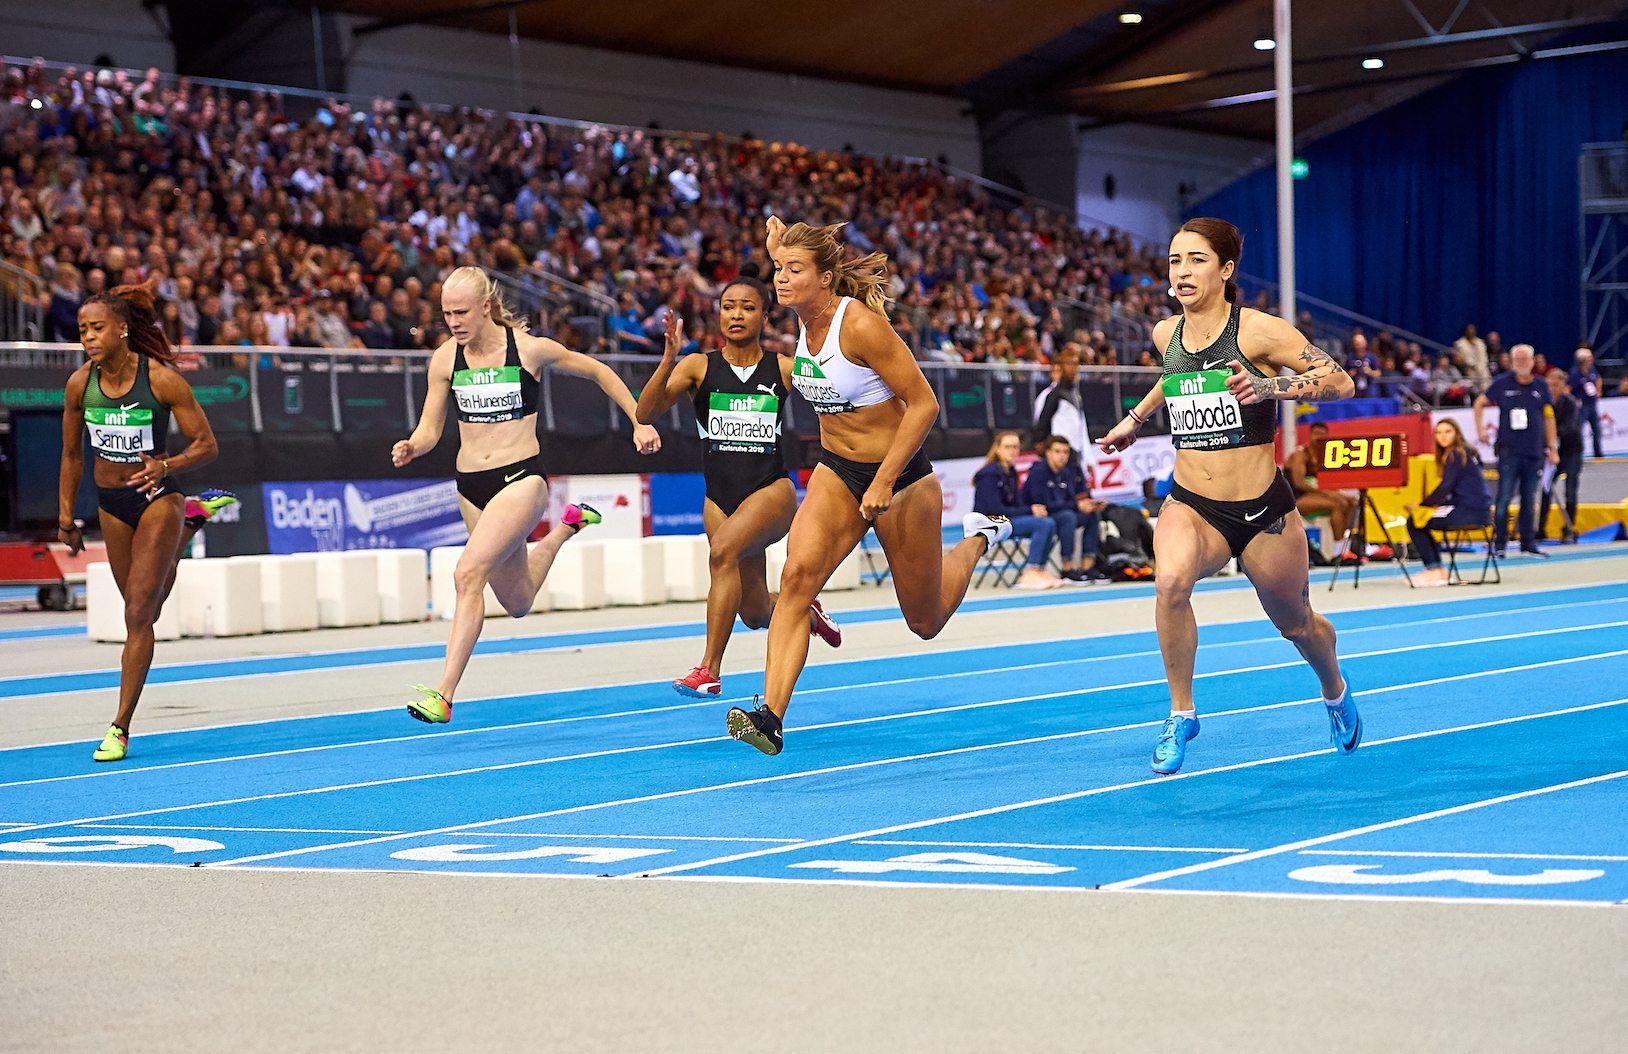 Ewa Swoboda races the 60m at the Init Indoor Meeting in Karlsruhe